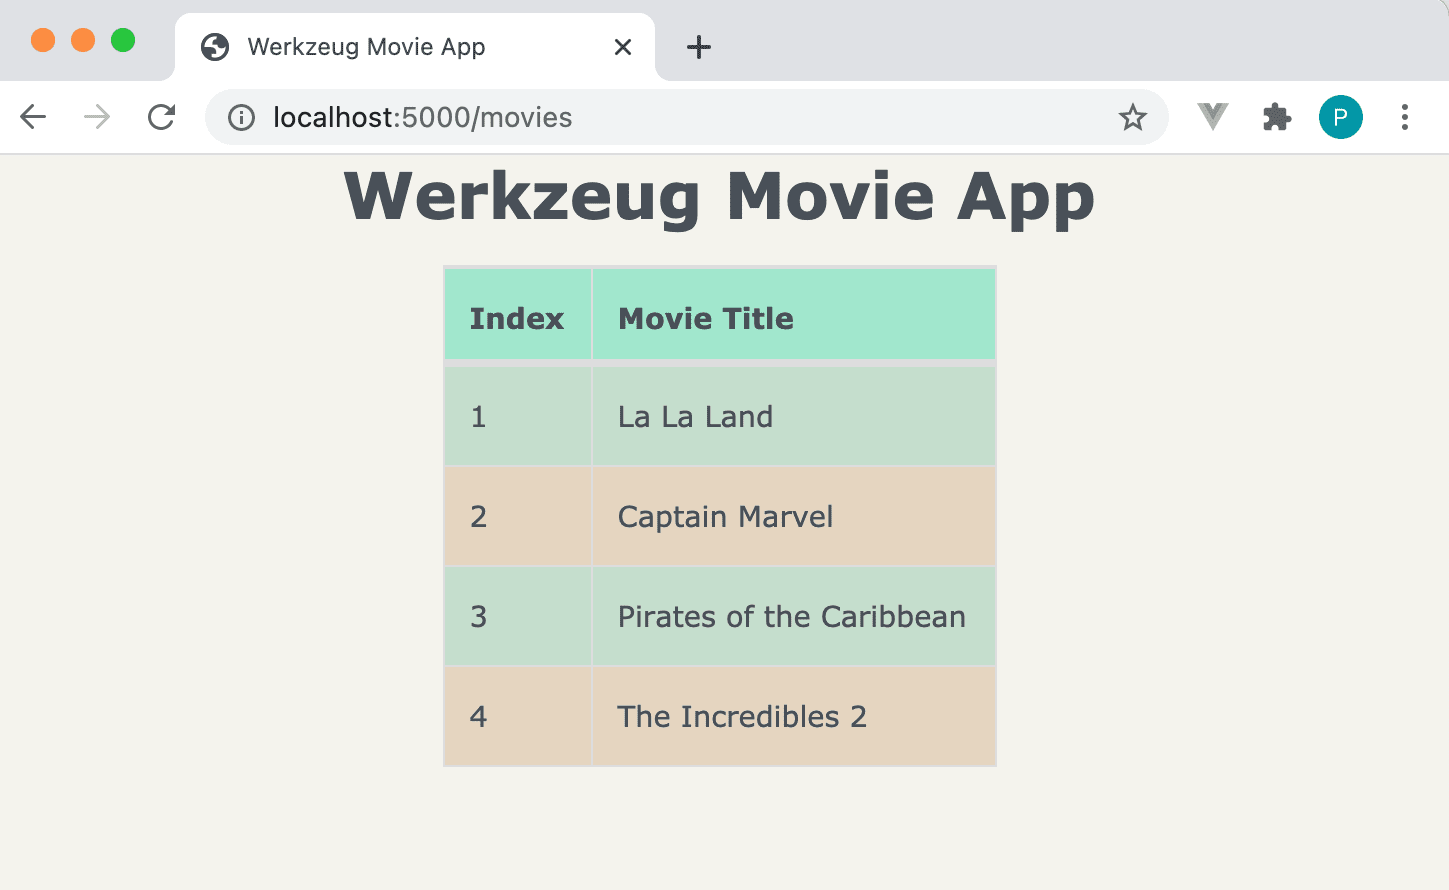 Processing Example - List of Movies